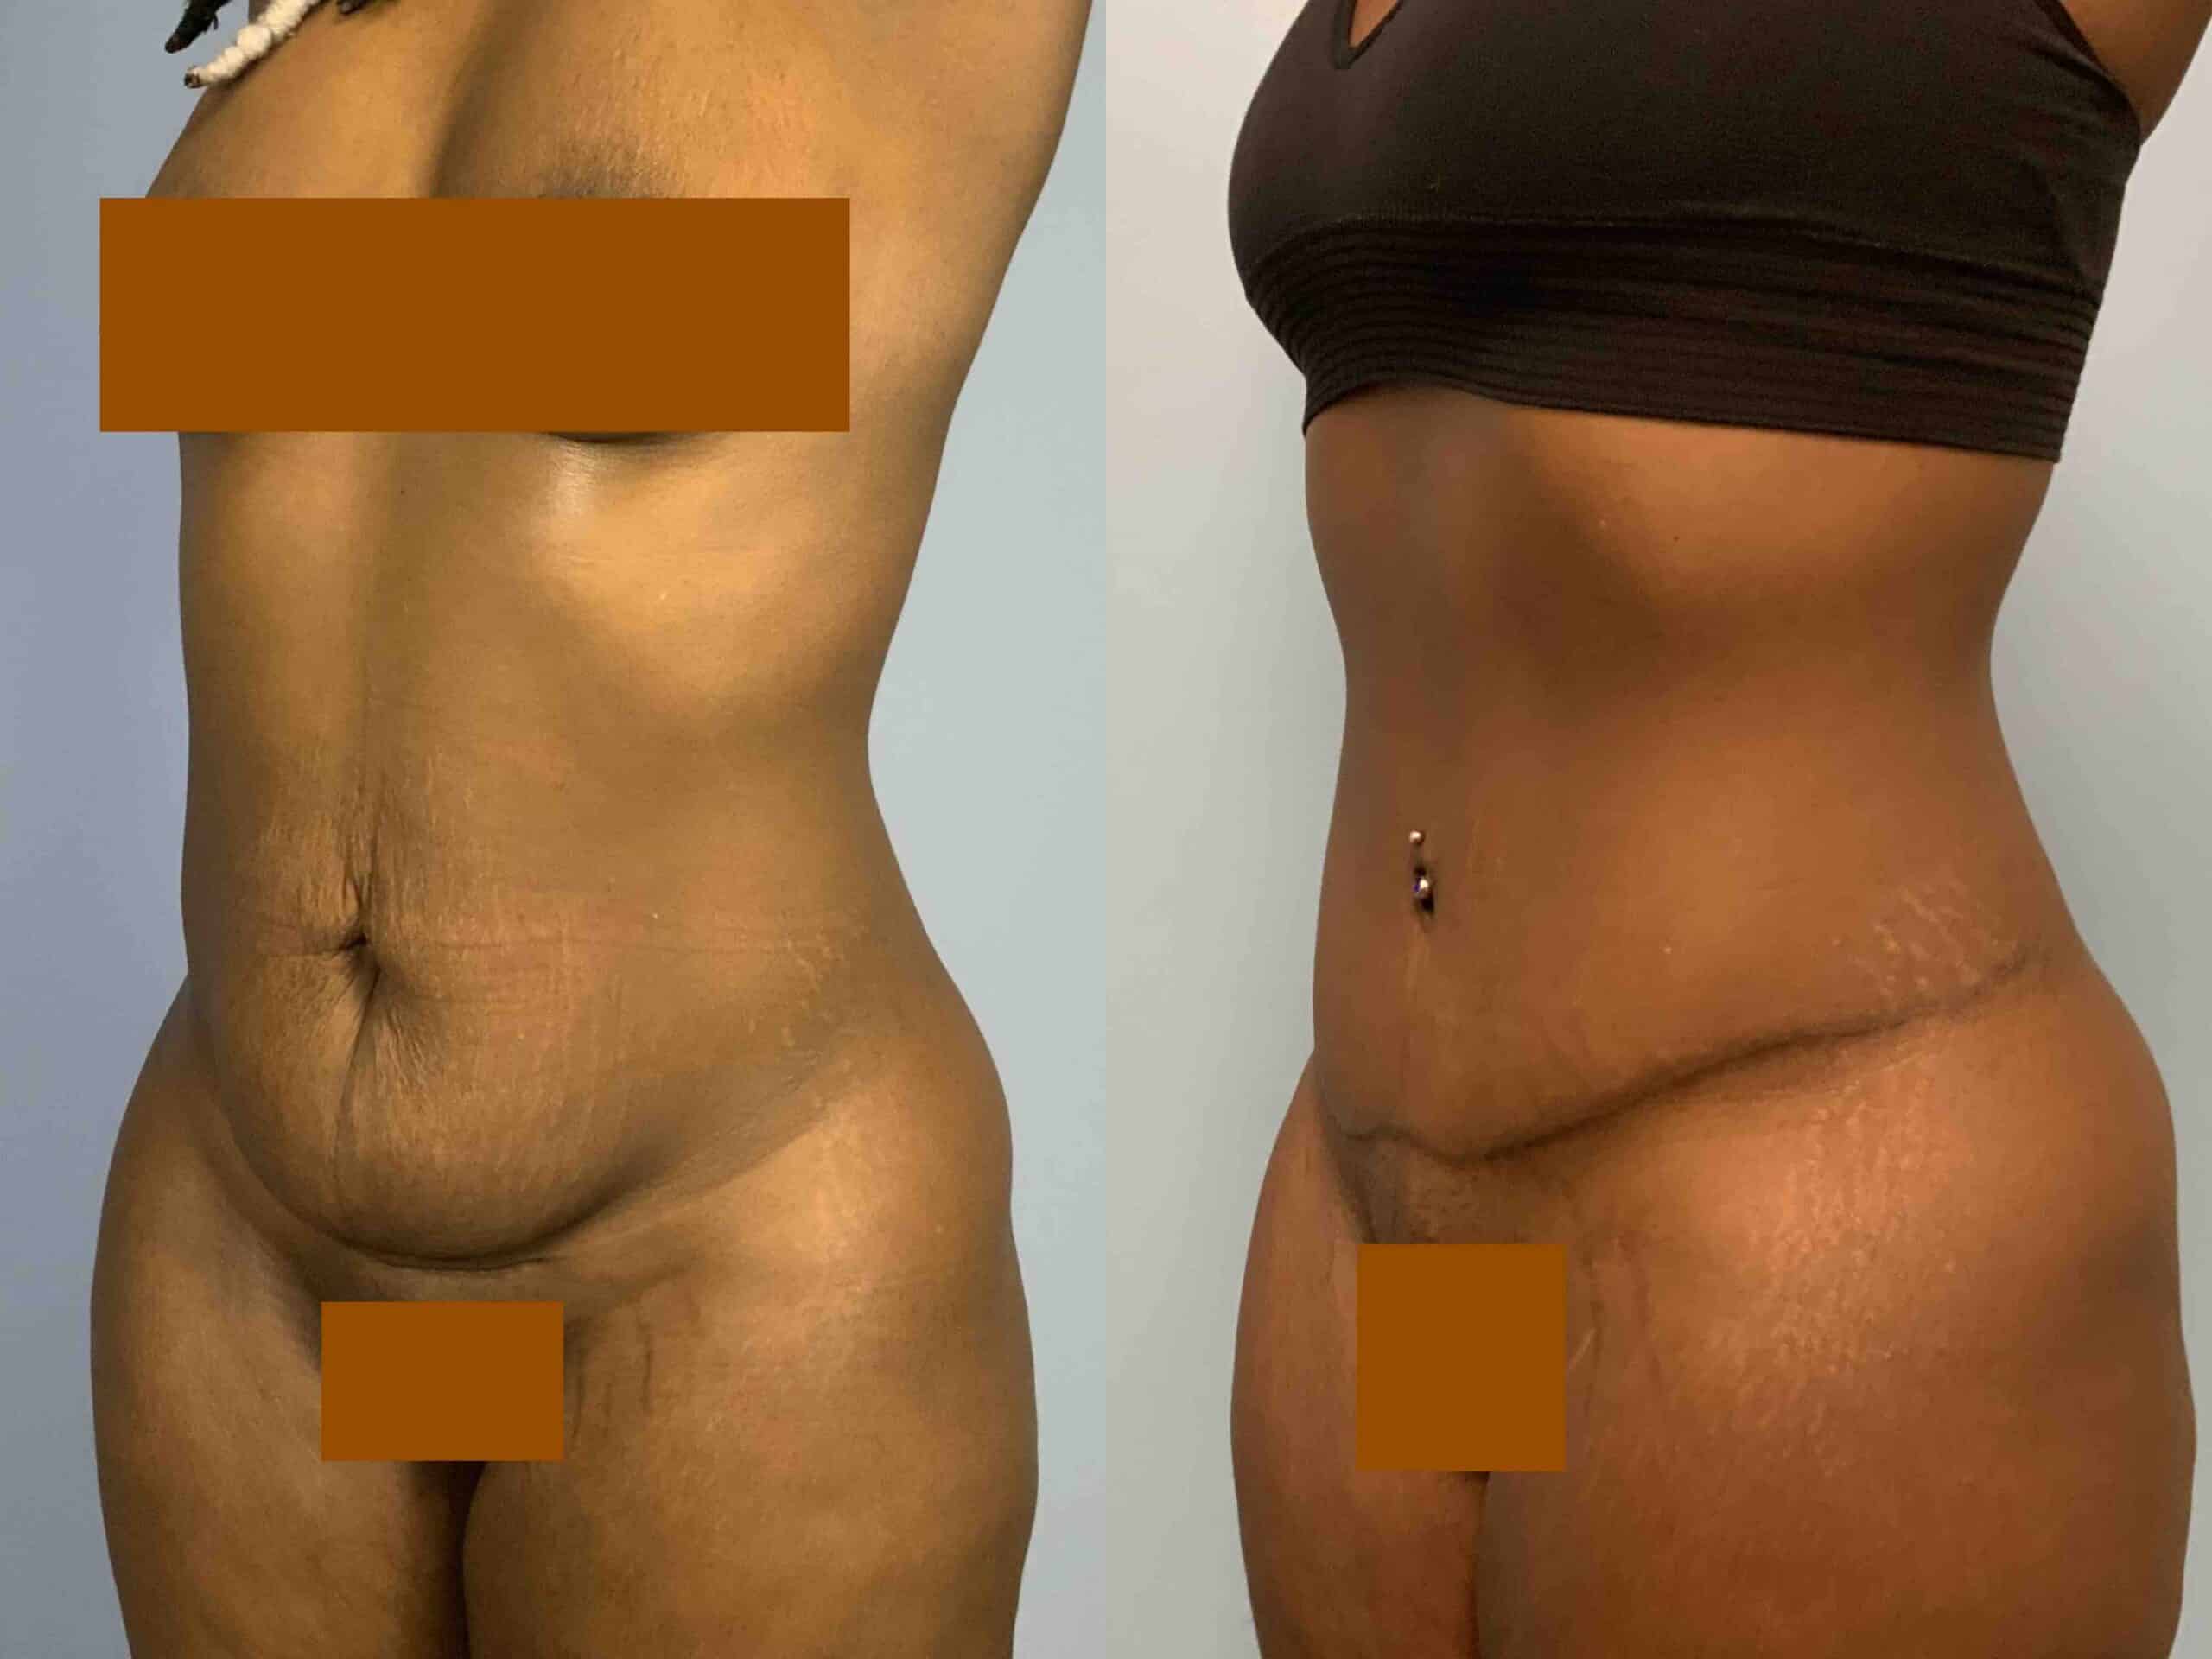 Before and after, 1 year post op from Tummy Tuck performed by Dr. Paul Vanek (diagonal view)